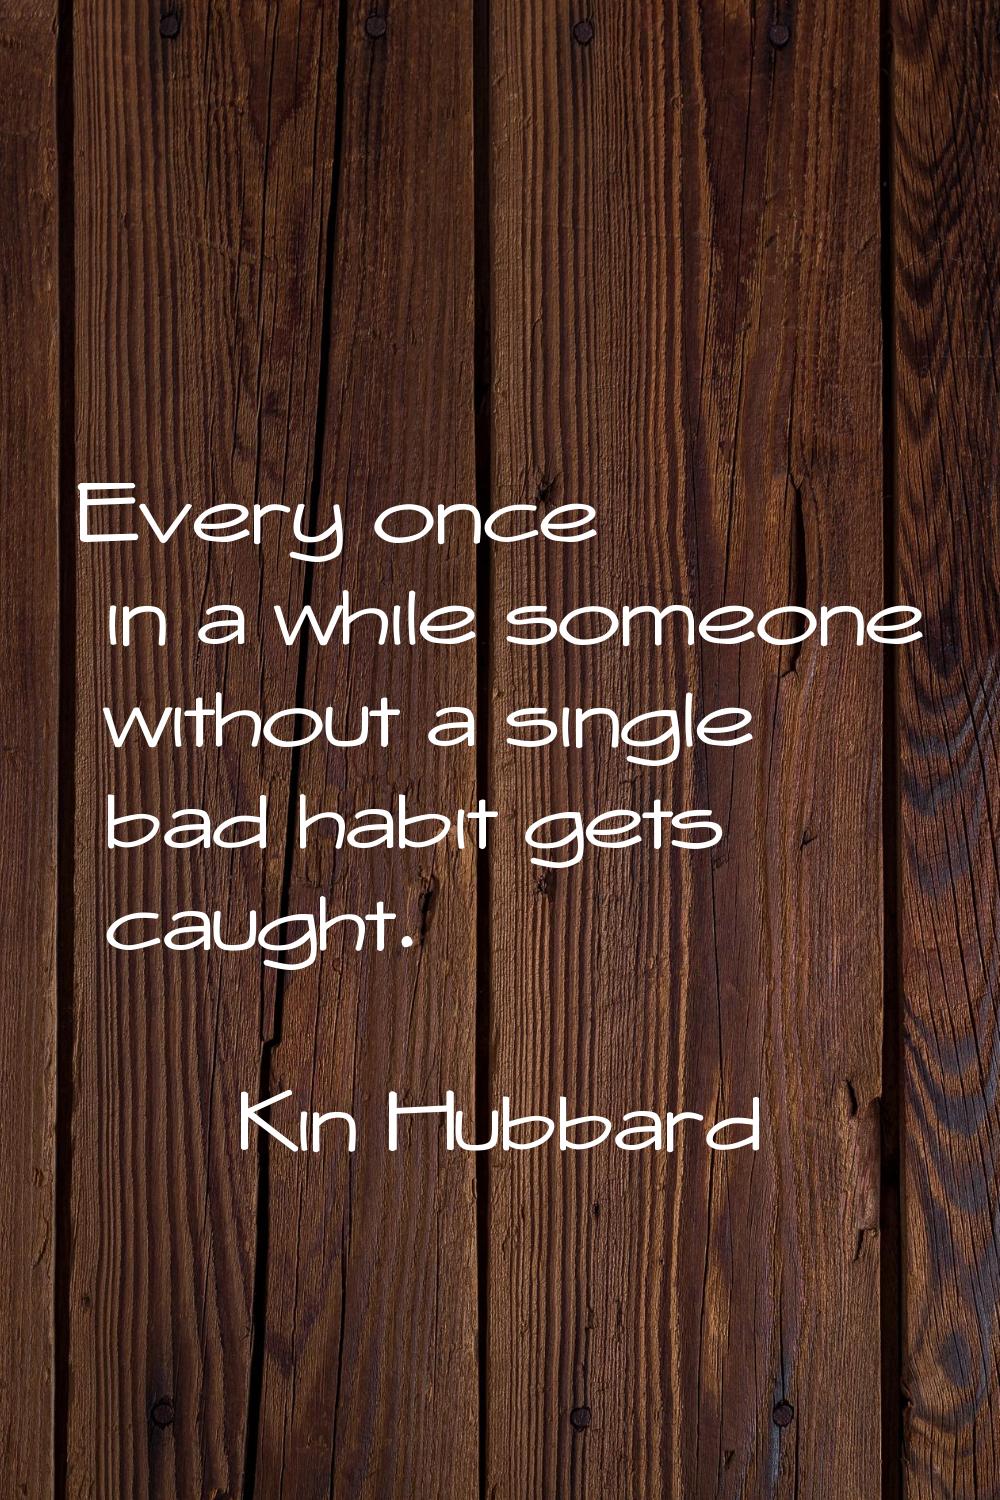 Every once in a while someone without a single bad habit gets caught.